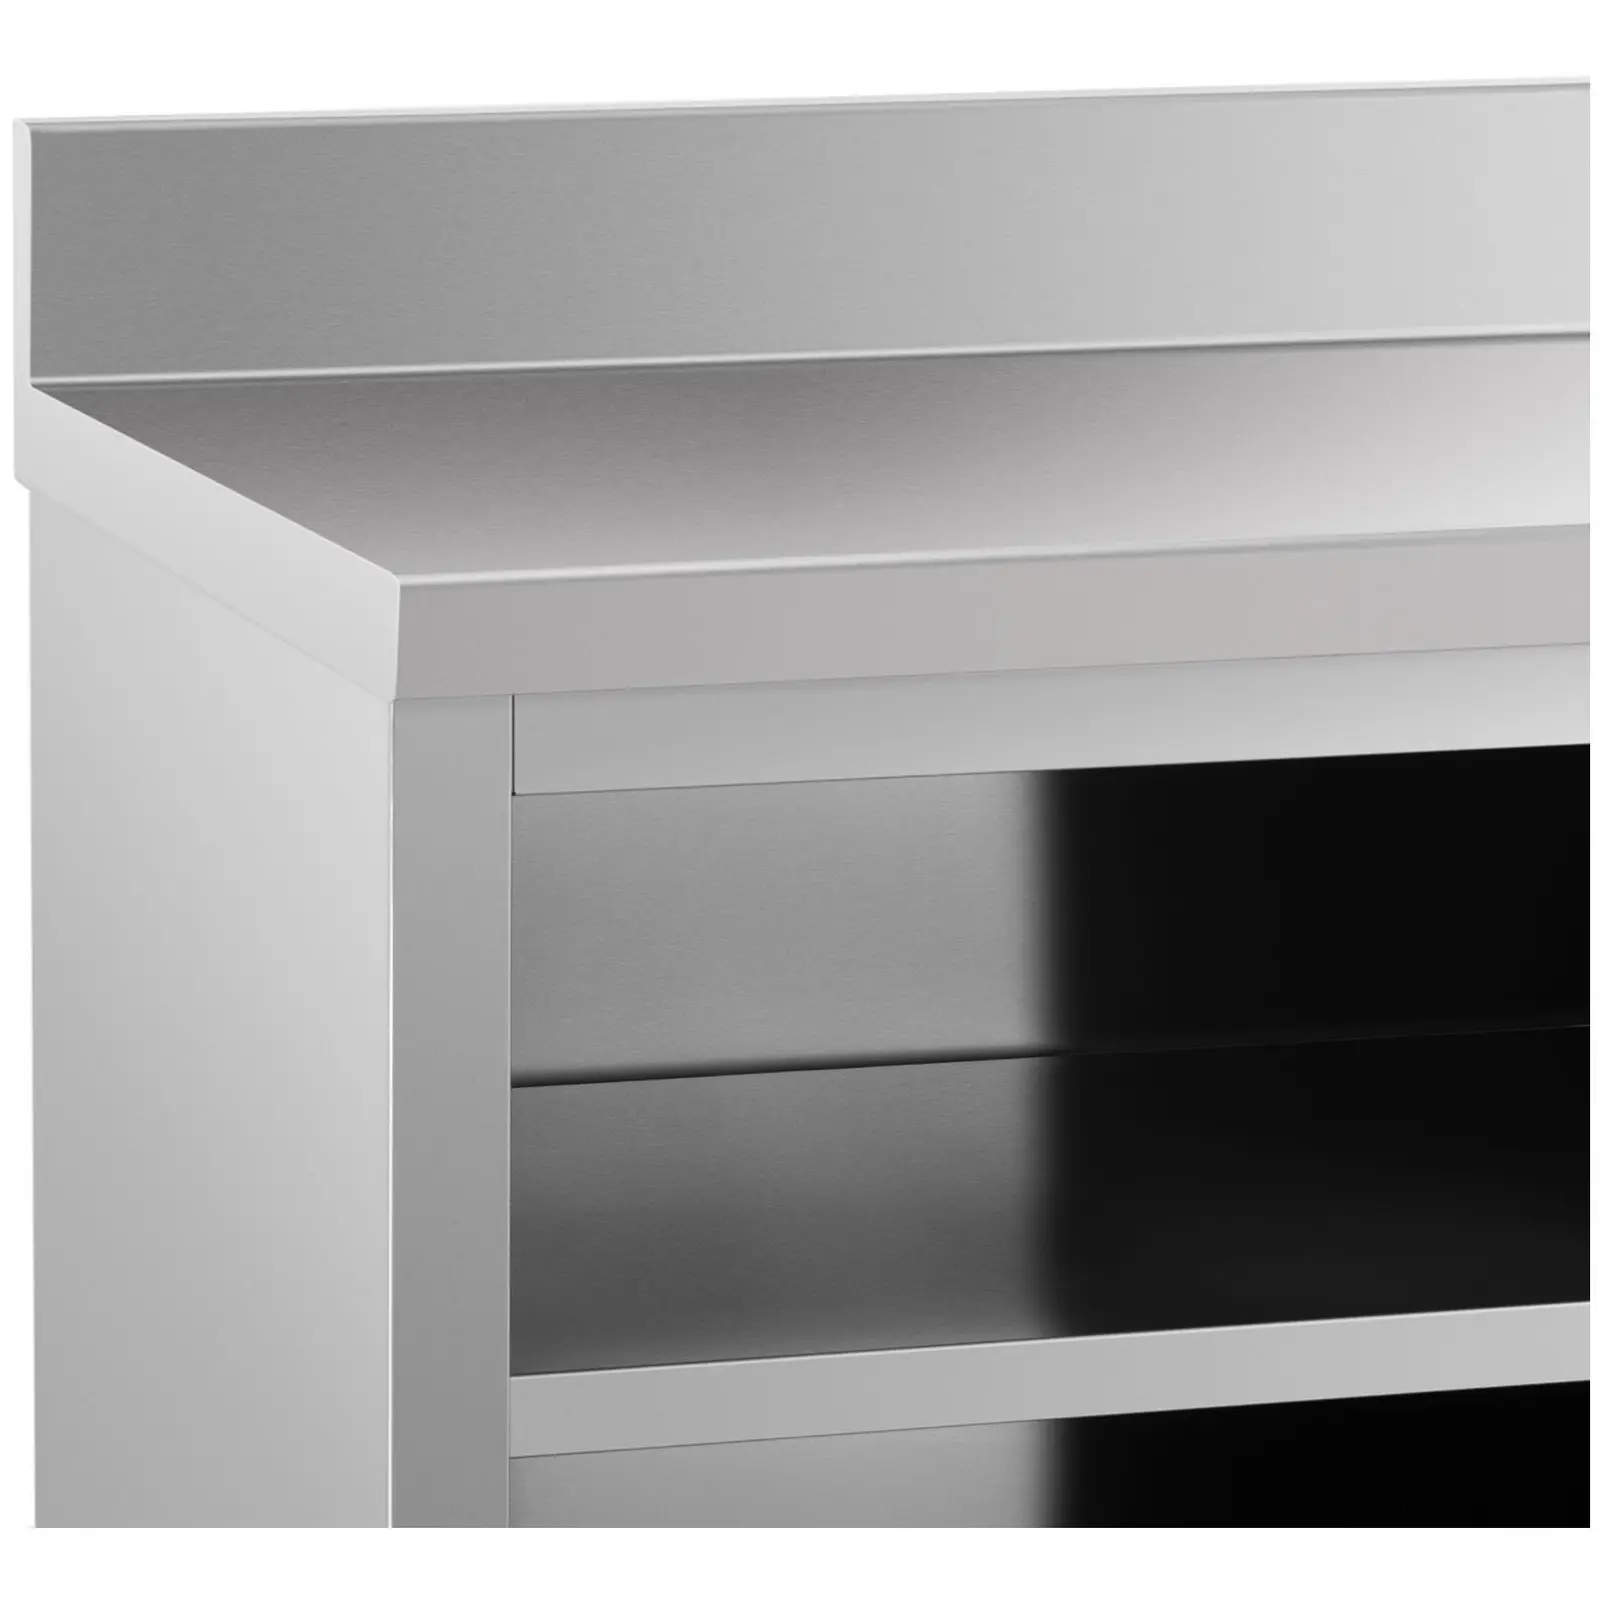 Stainless Steel Work Cabinet - 150 x 70 x 85 cm - Load Capacity - 600 kg